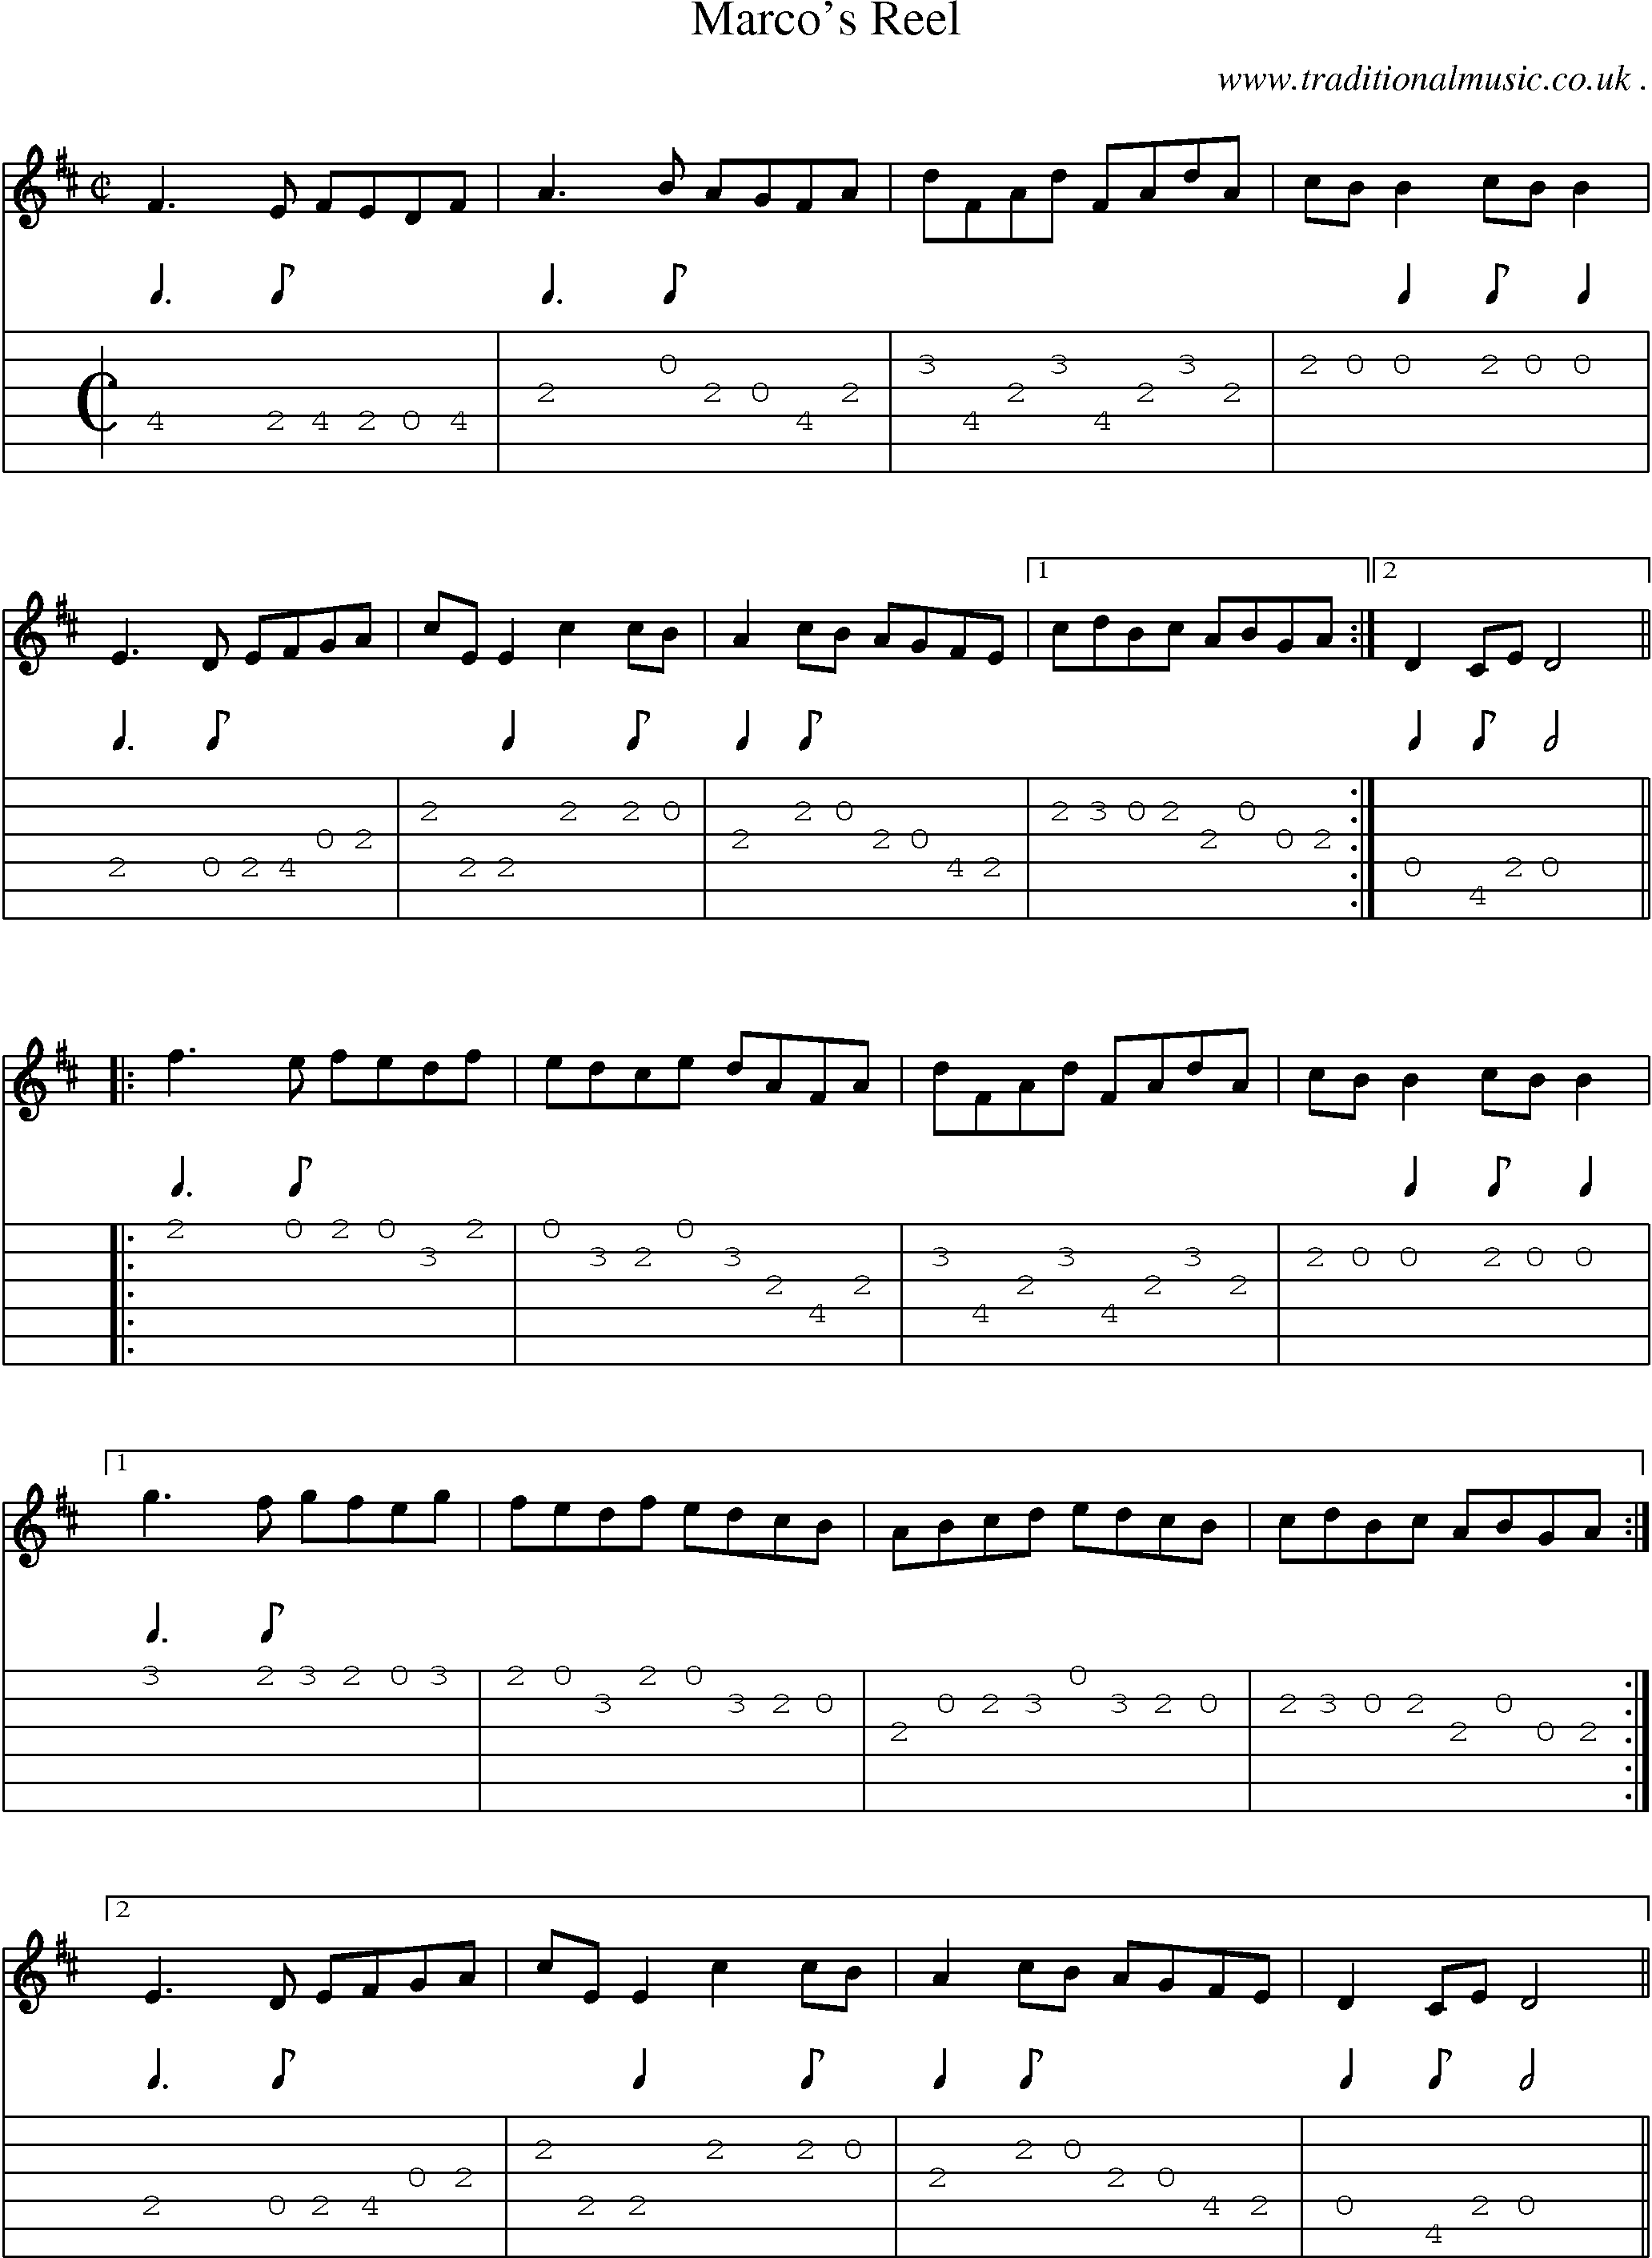 Sheet-Music and Guitar Tabs for Marcos Reel